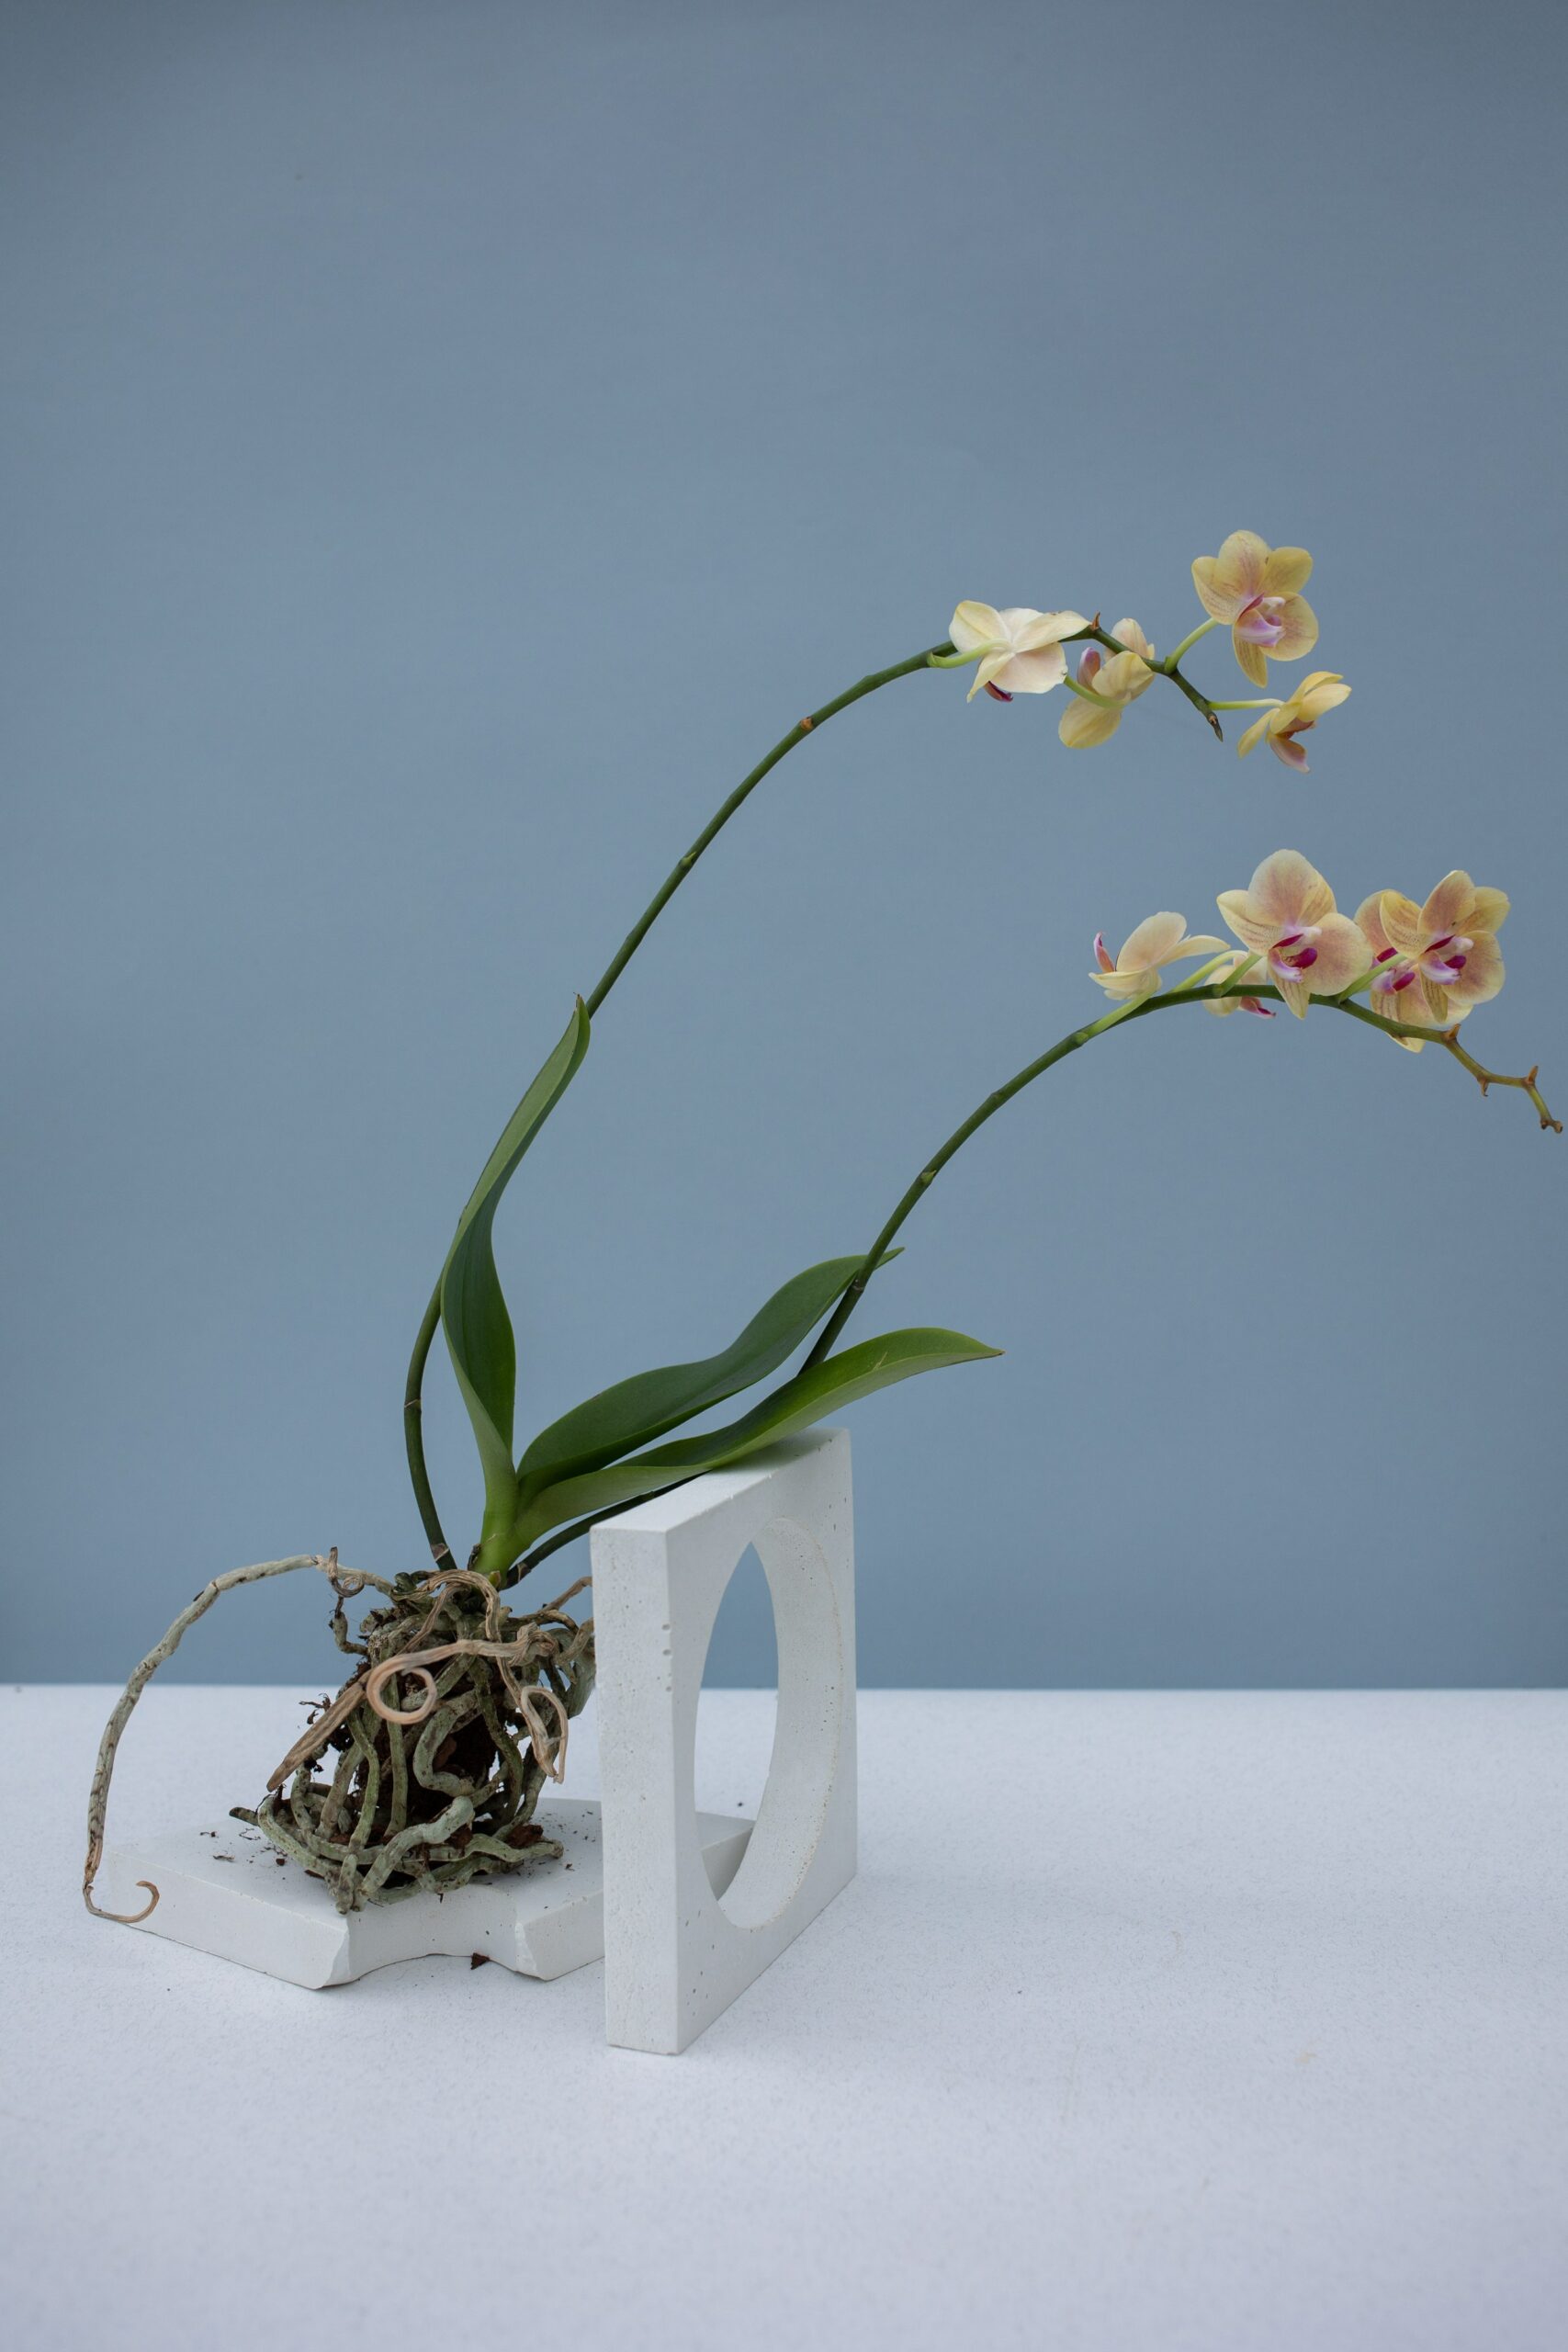 Identifying whether a flower has single or double spiked blooms determines how to prune and care for your orchids